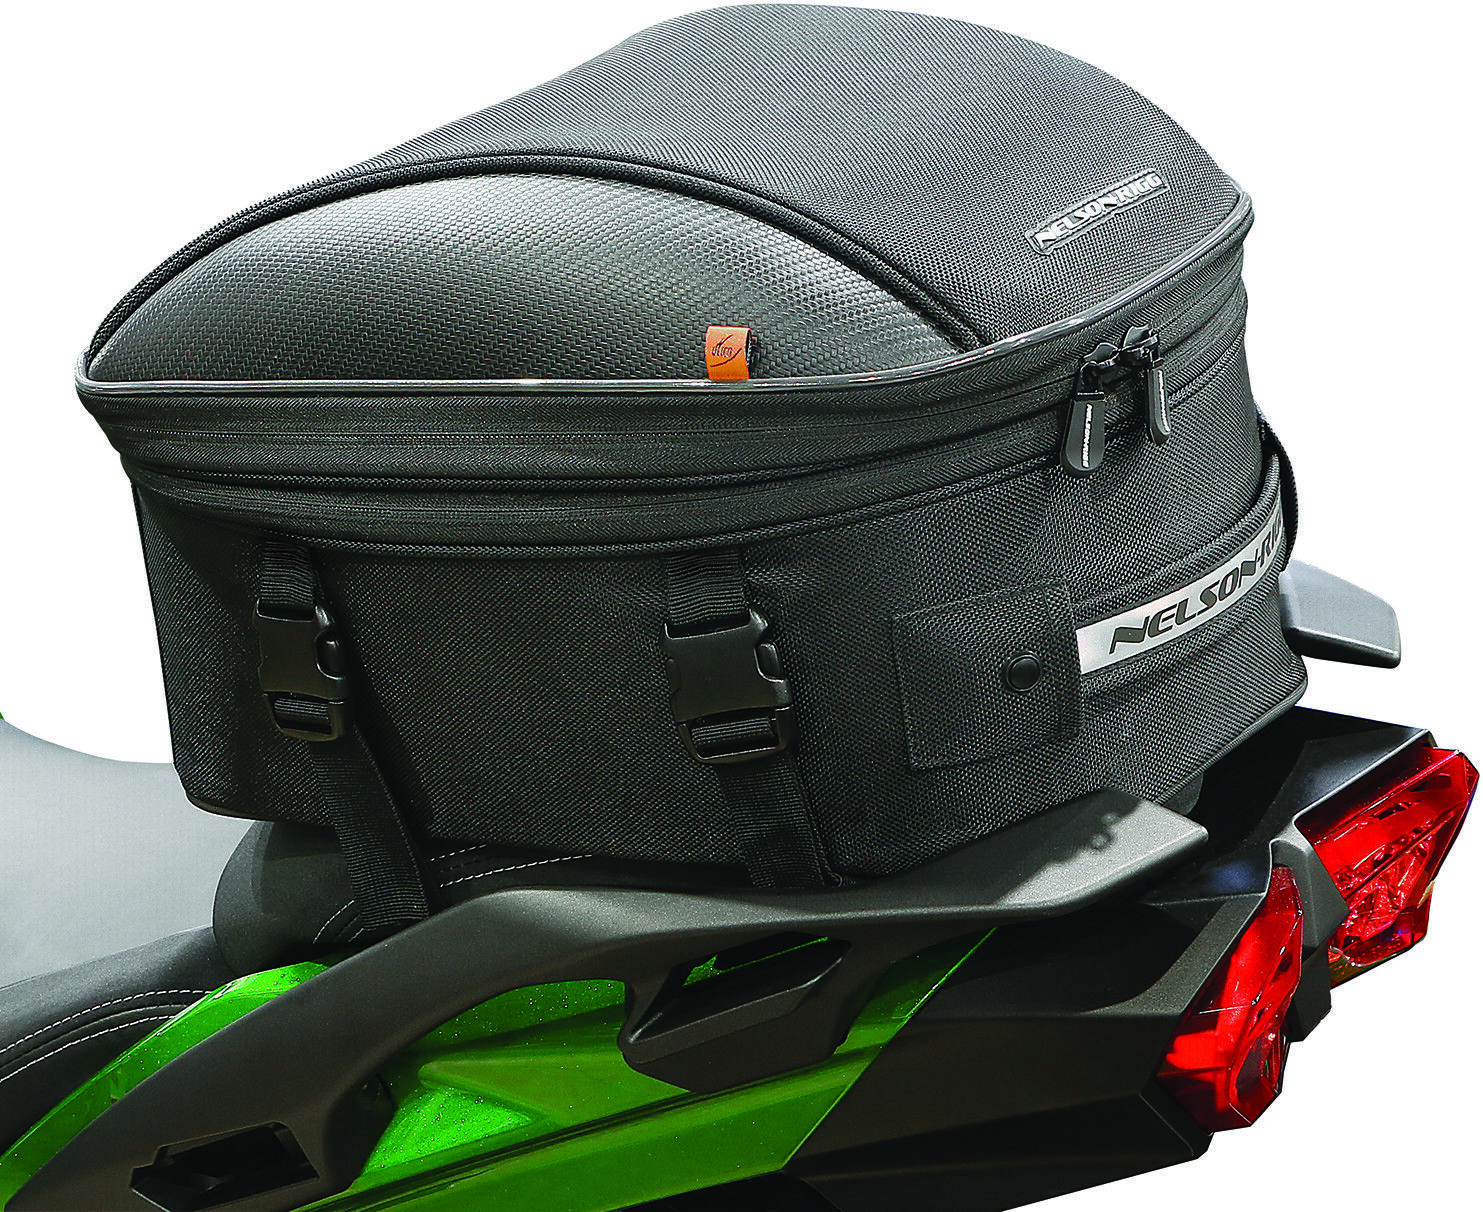 Nelson Rigg Commuter Touring/Seat Bag CL-1060-ST2